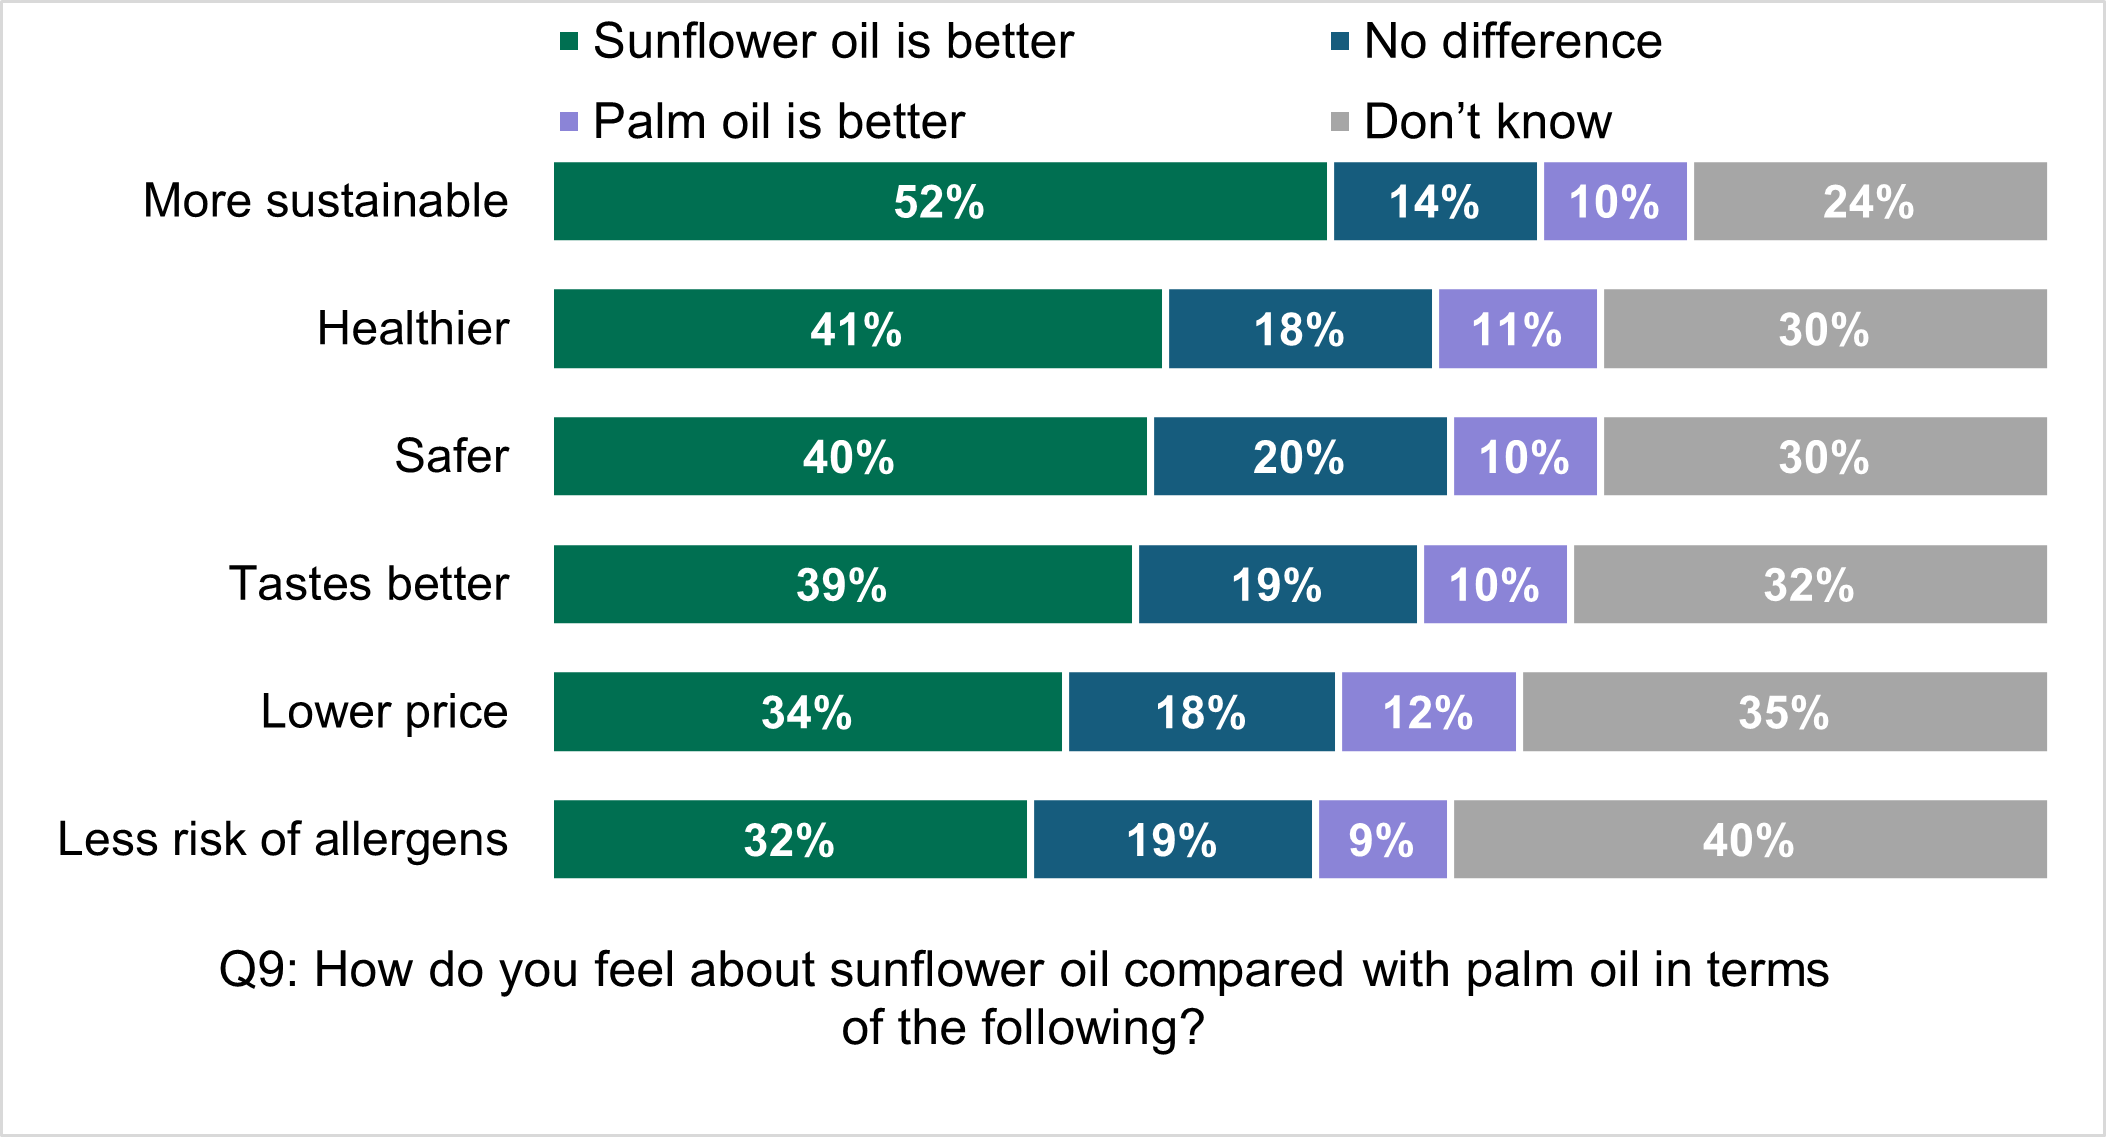 Consumer perceptions of sunflower oil compared to palm oil, 52% believe sunflower is more sustainable and 41 and 40% of consumers think it is healthier and safer. 